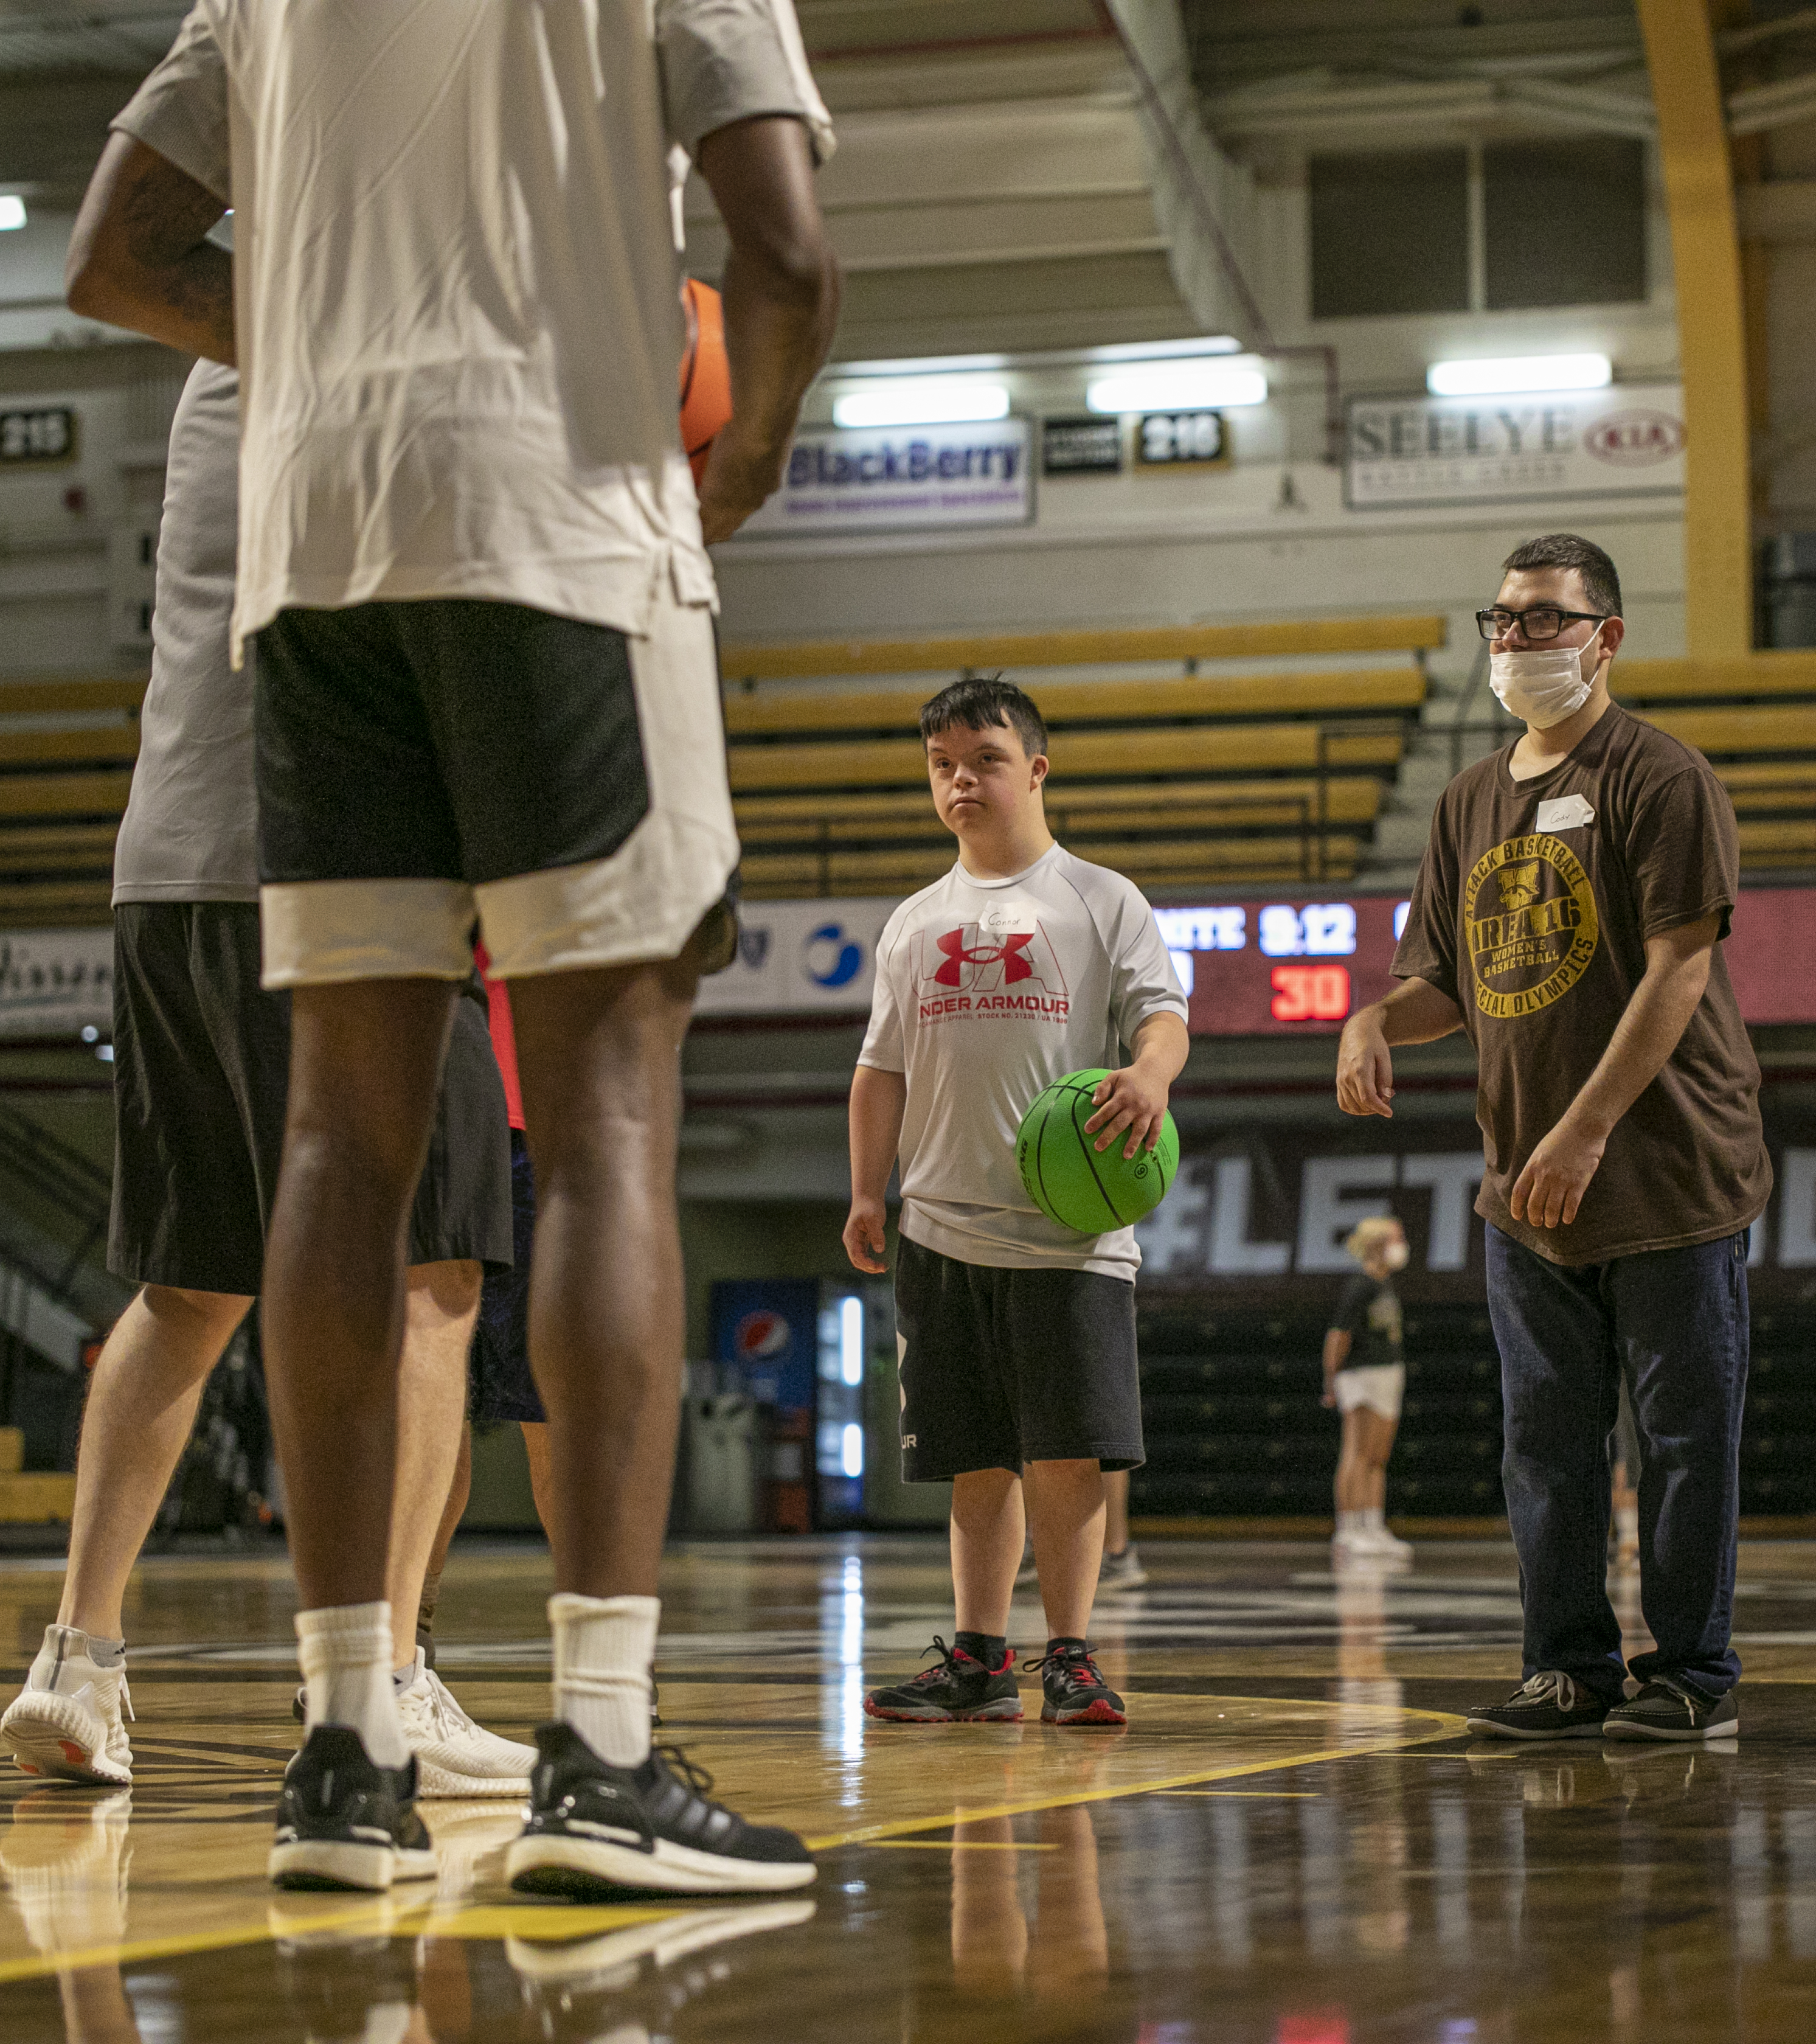 The Beautiful Lives Project collaborates with Western Michigan University’s basketball team to give disabled kids and adults a chance to play basketball with members of WMU's men's basketball team and coaching staff at WMU’s University Arena in Kalamazoo, Michigan on Wednesday, June 15, 2022. (Gabi Broekema | MLive.com)